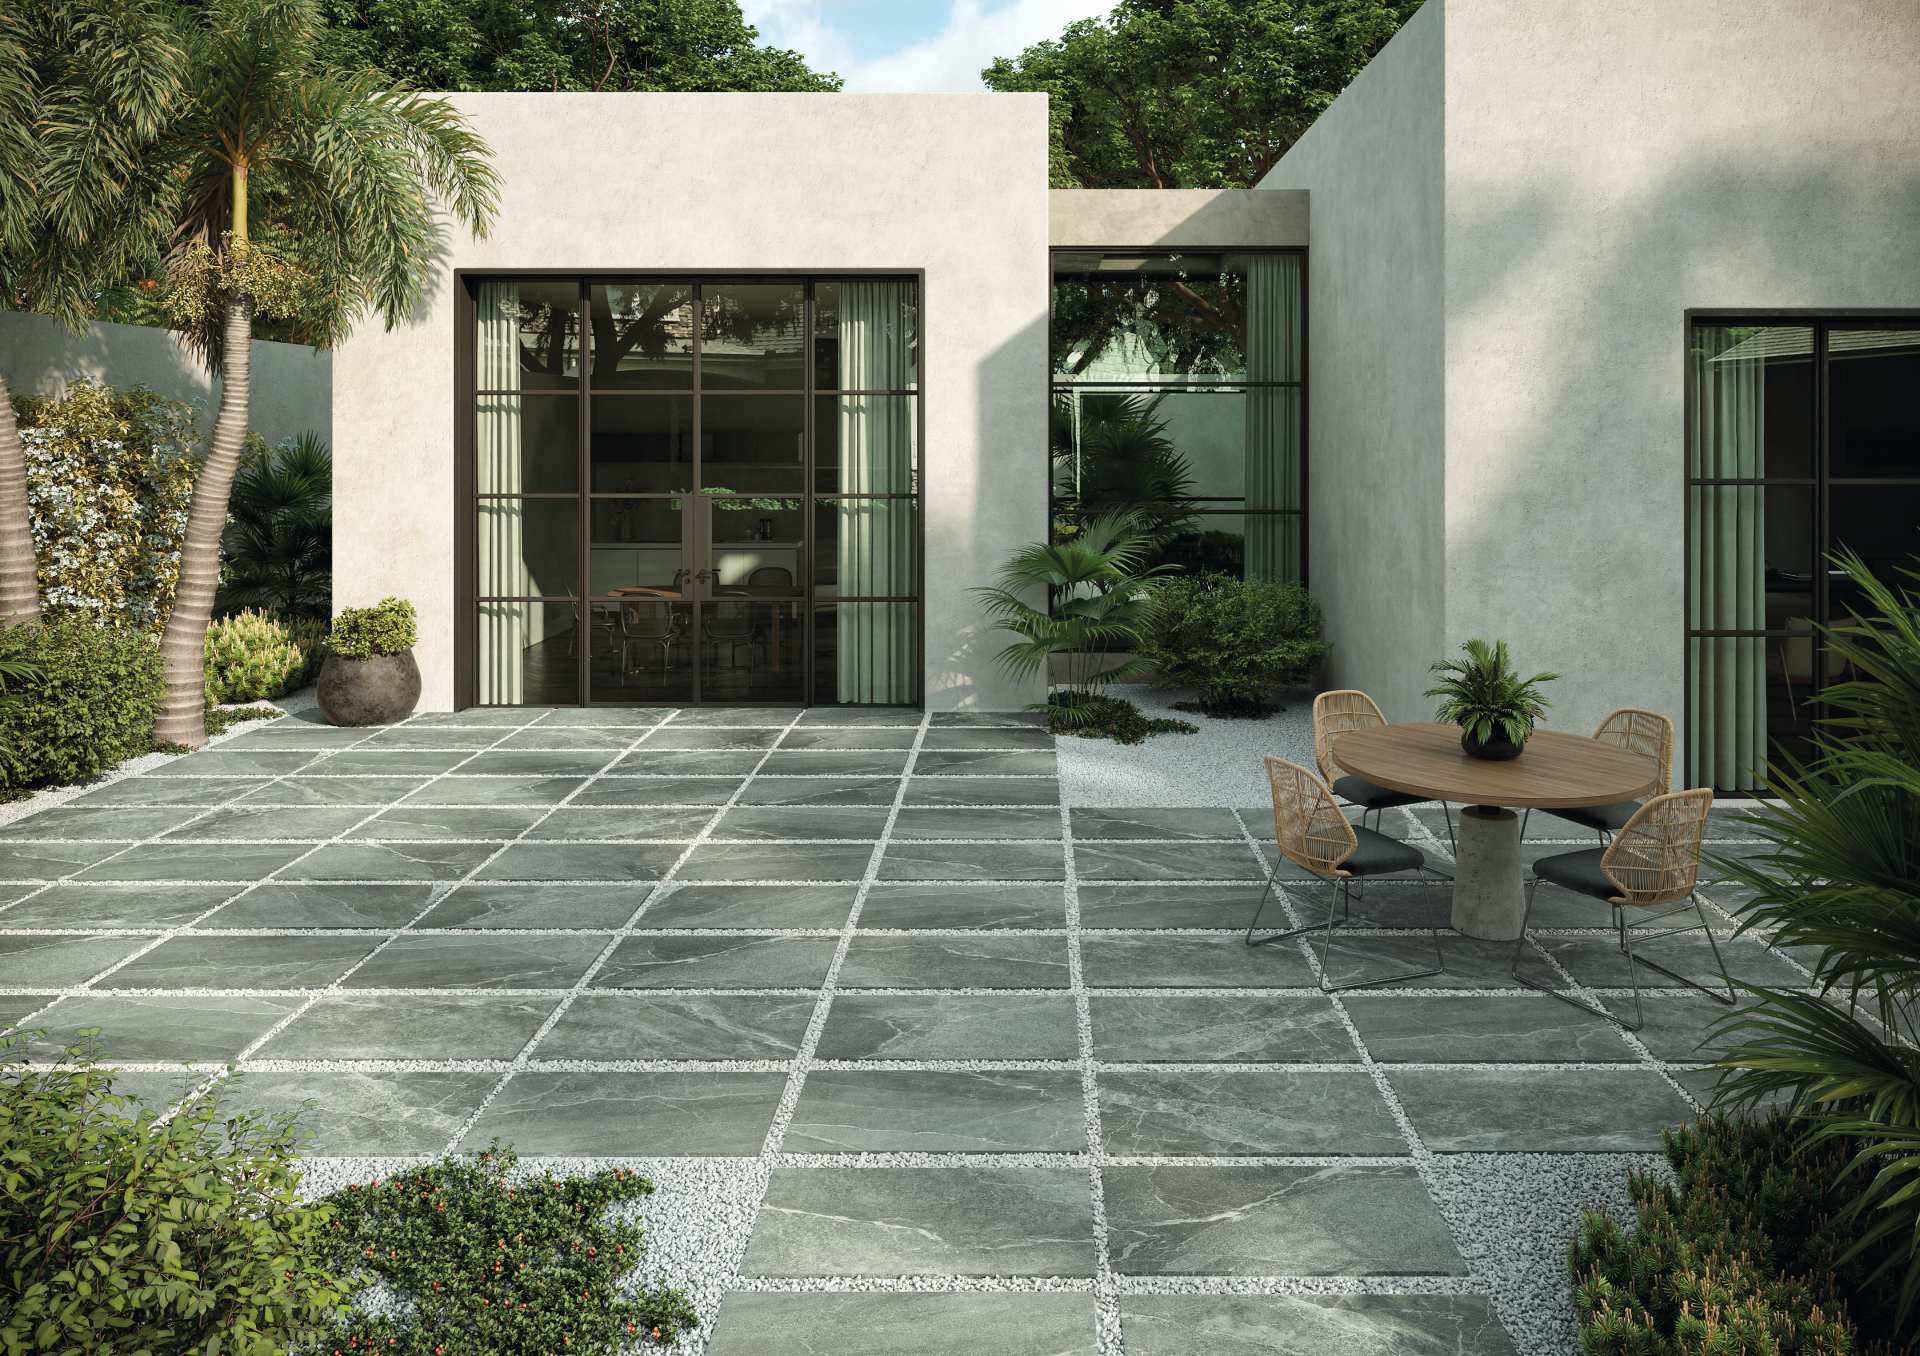 What Makes Outdoor Tiles Different From Indoor Ones?